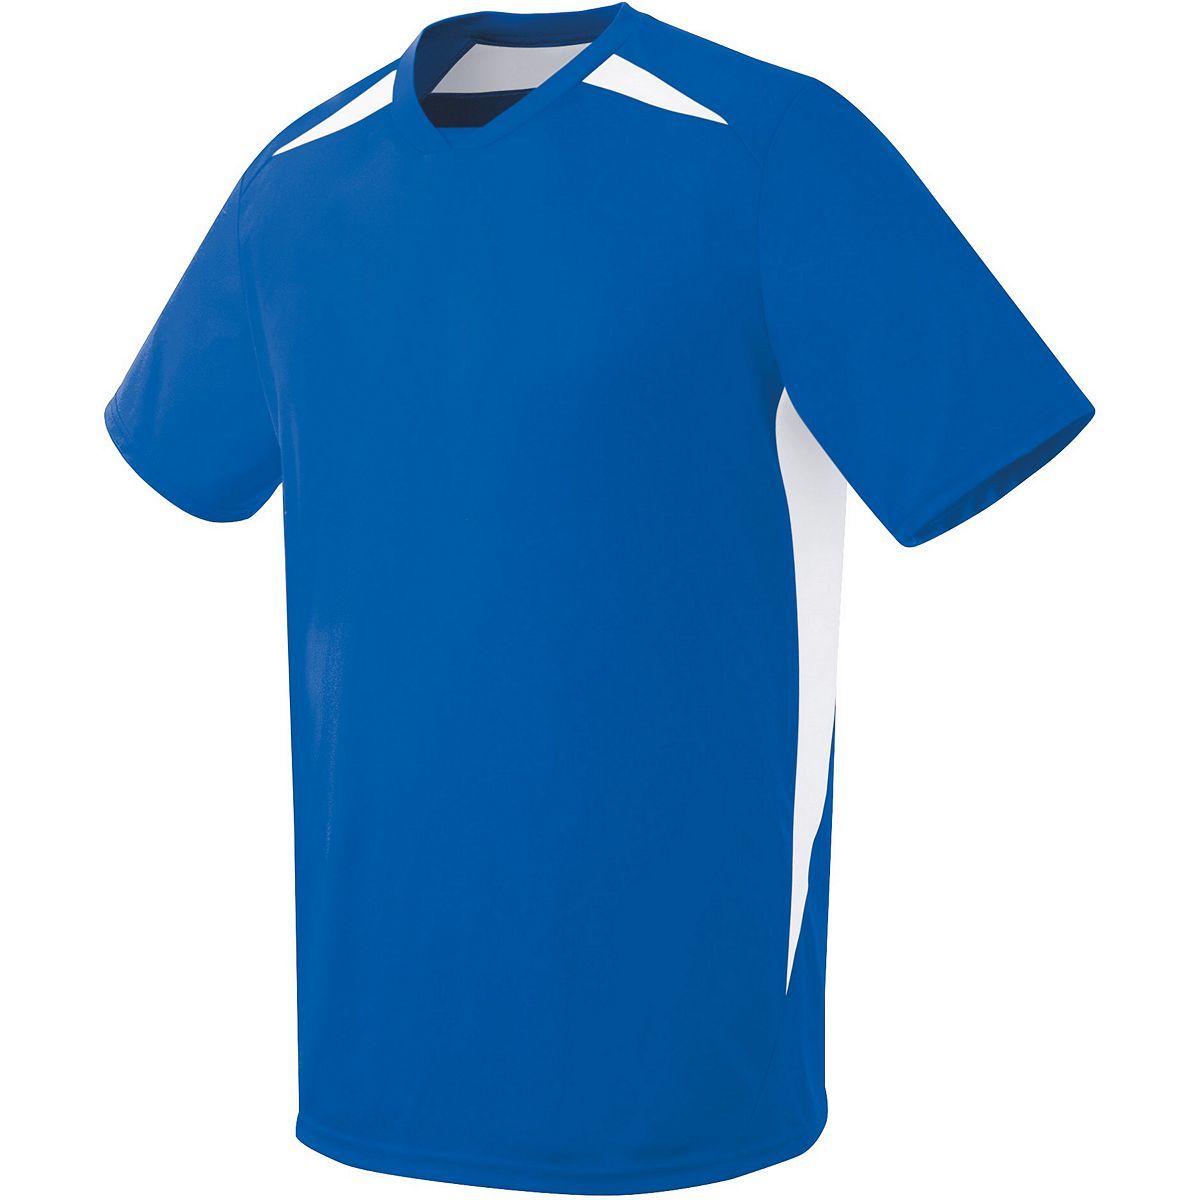 High 5 Youth Hawk Jersey in Royal/White  -Part of the Youth, Youth-Jersey, High5-Products, Soccer, Shirts, All-Sports-1 product lines at KanaleyCreations.com